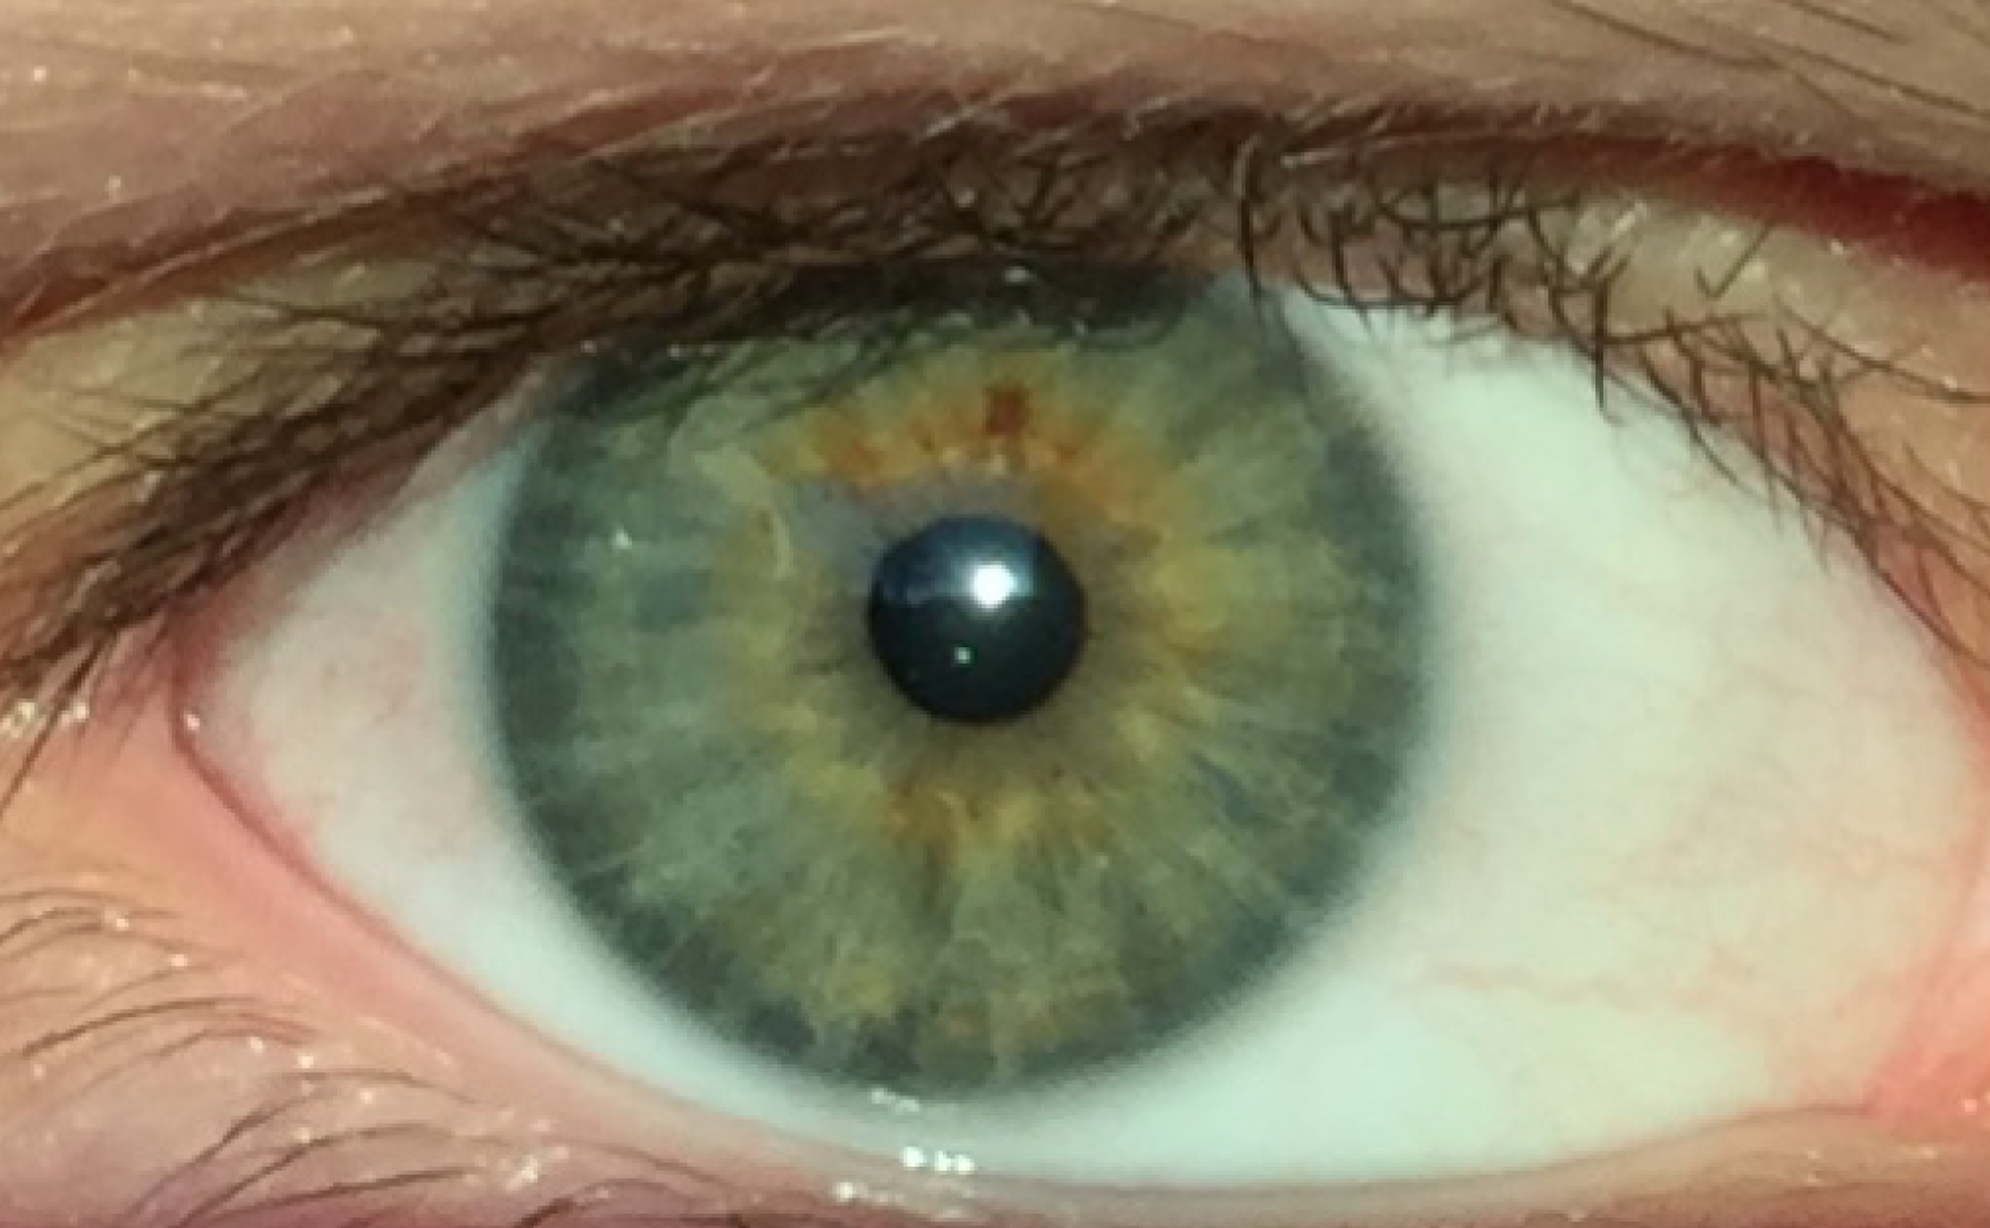 File:Green Eyes Human.png - Wikimedia Commons